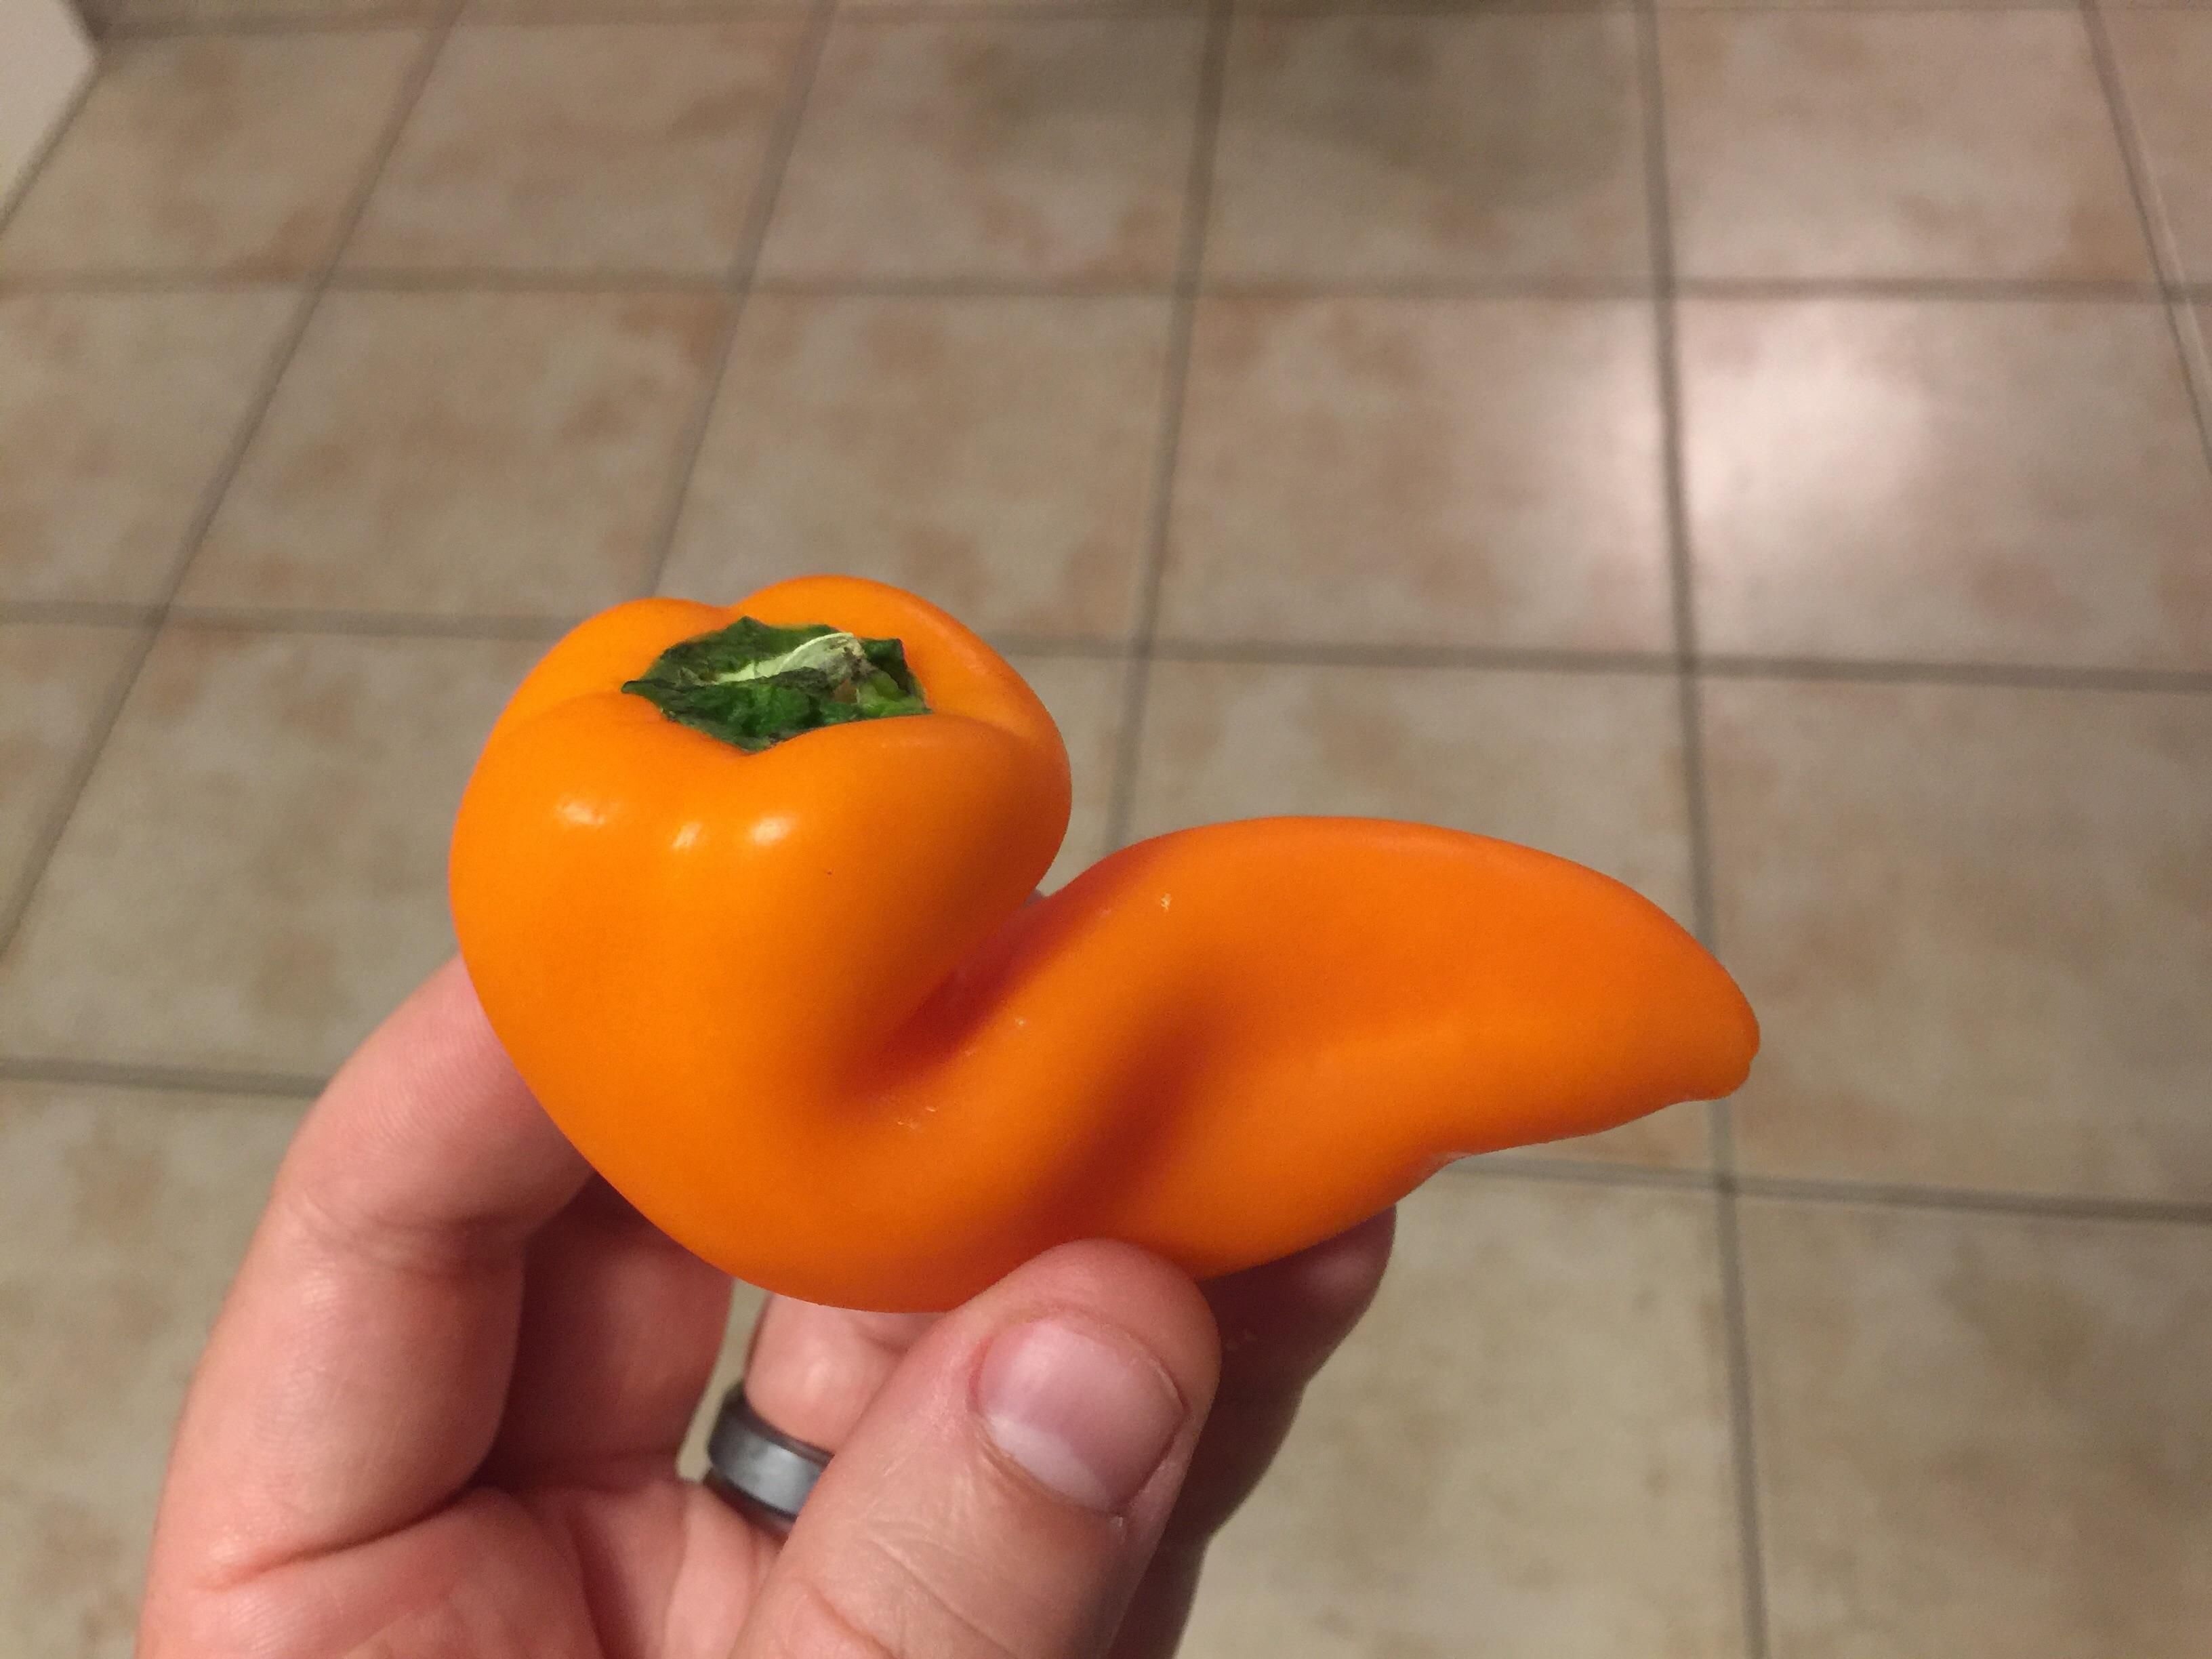 While packing my son's lunch, I found a pepper that brought me back to my college days.